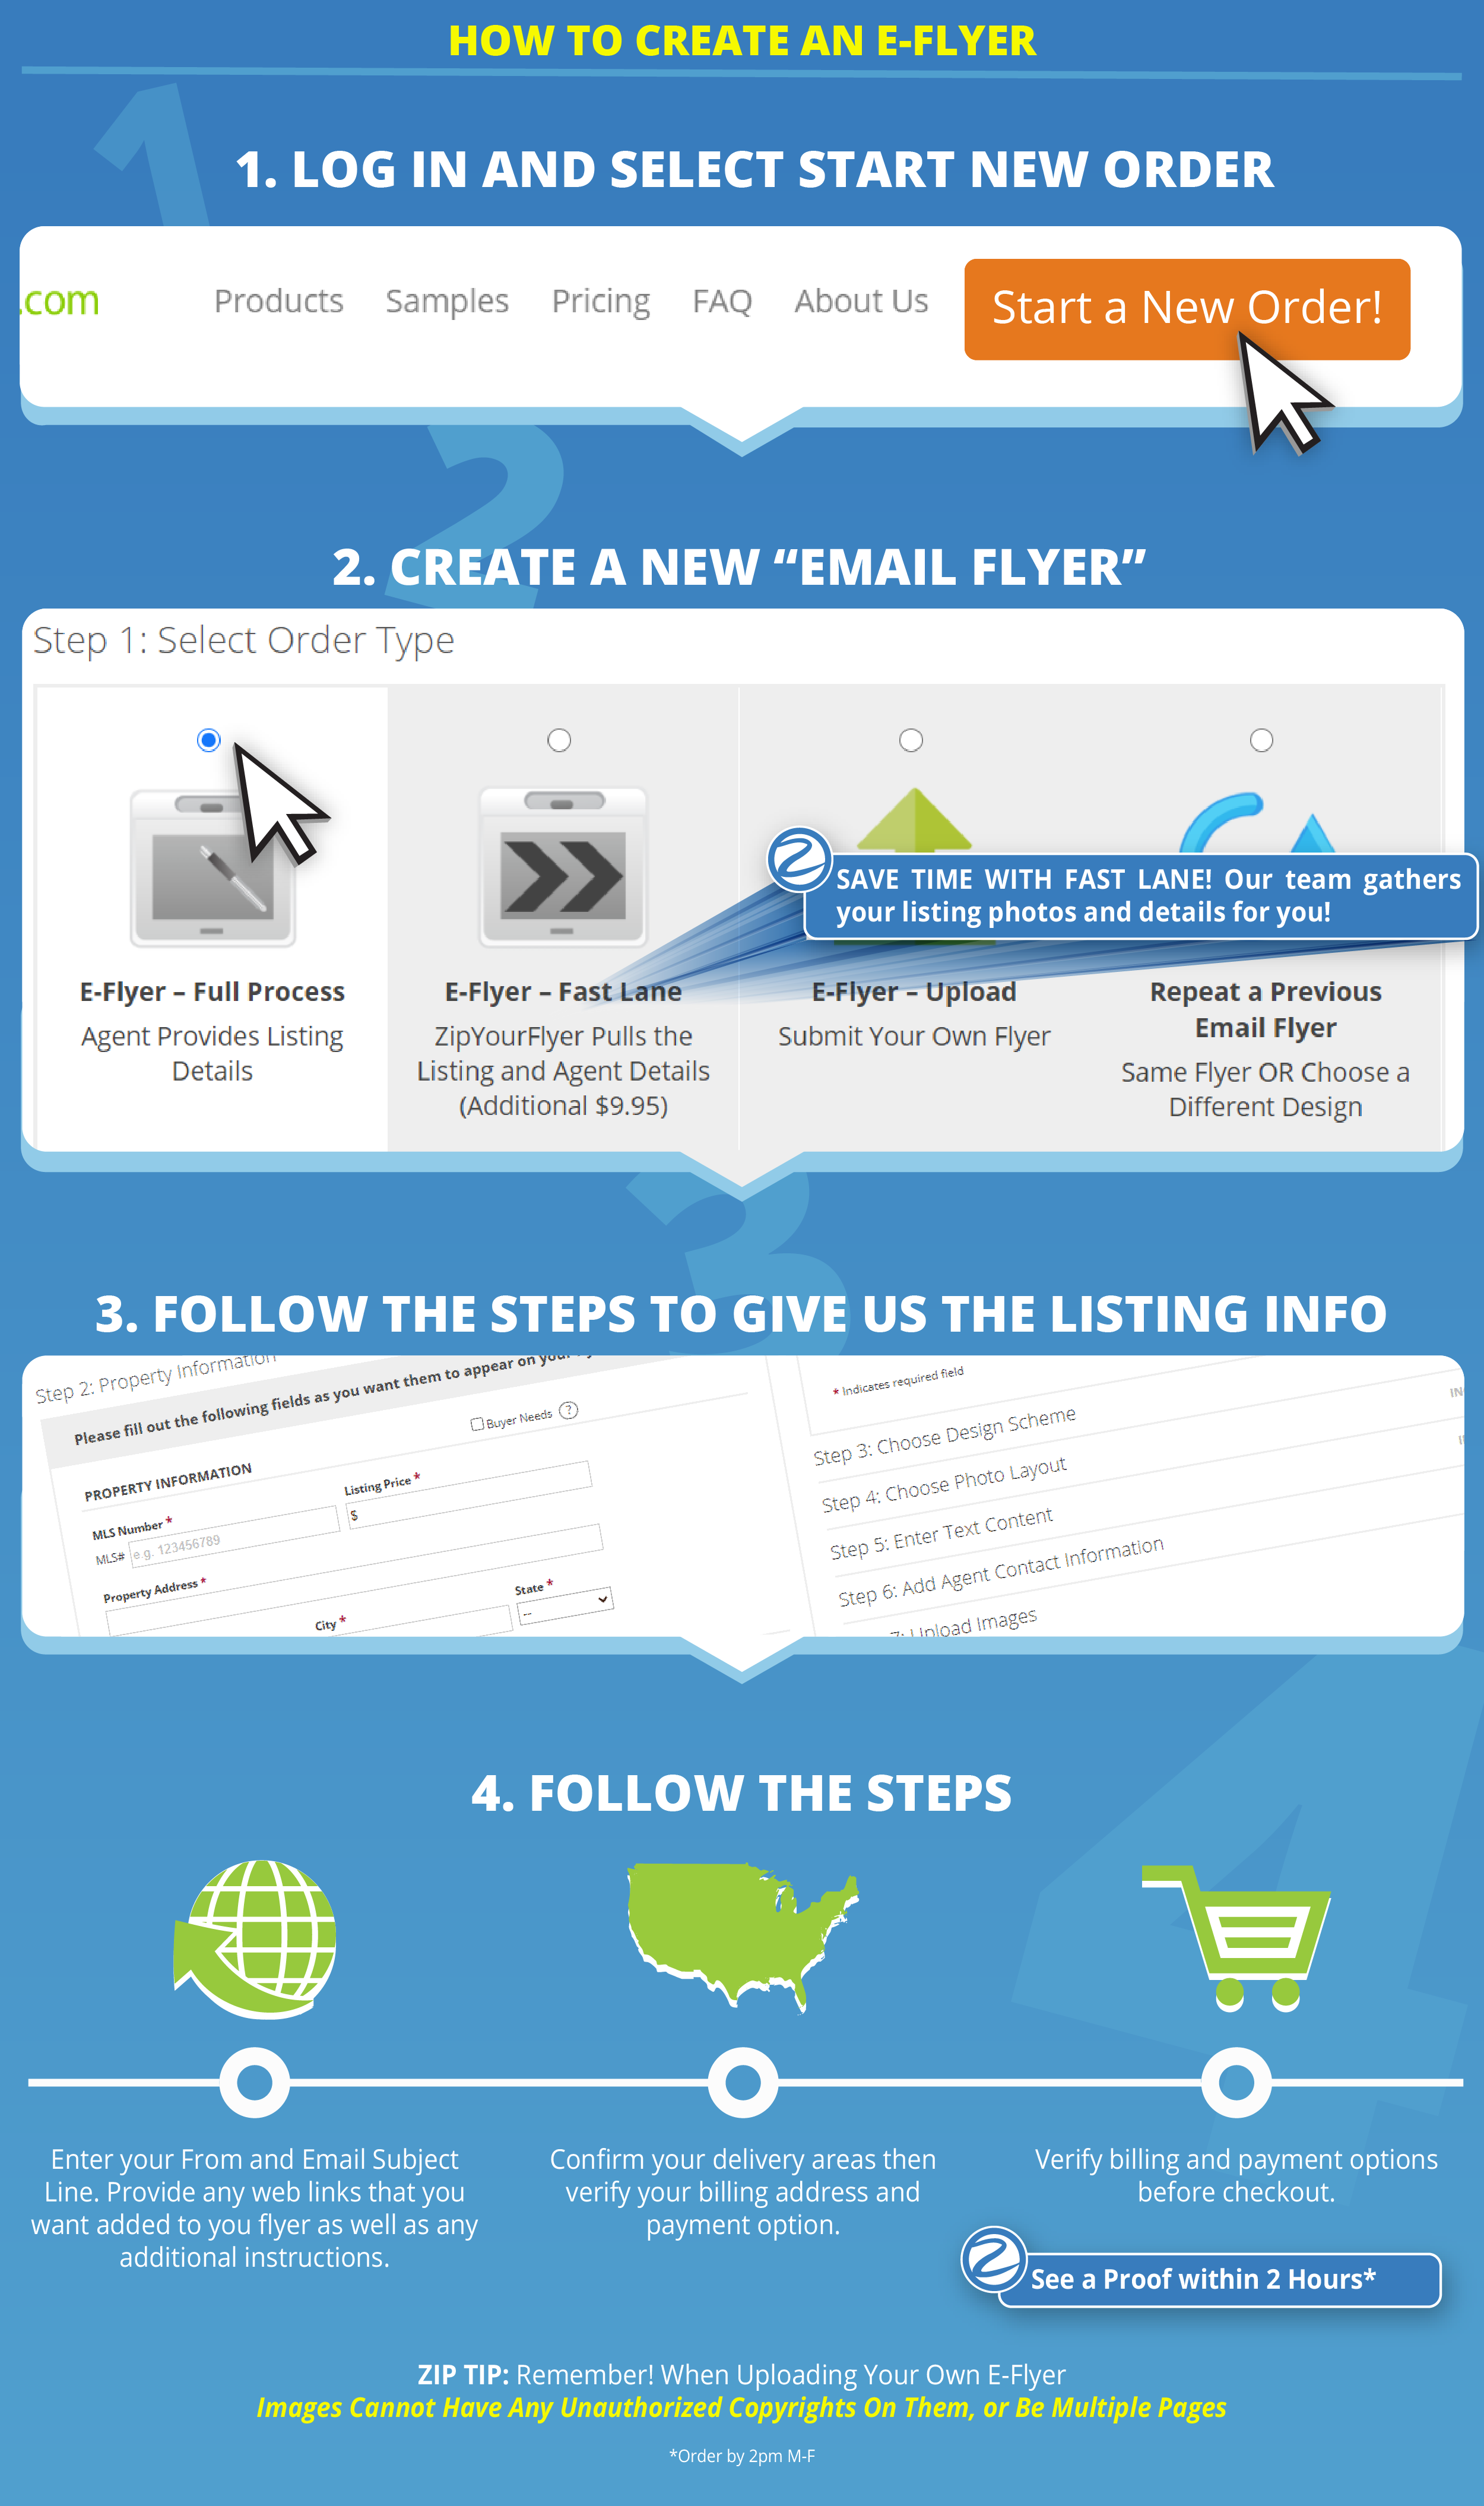 How to Place an email flyer order